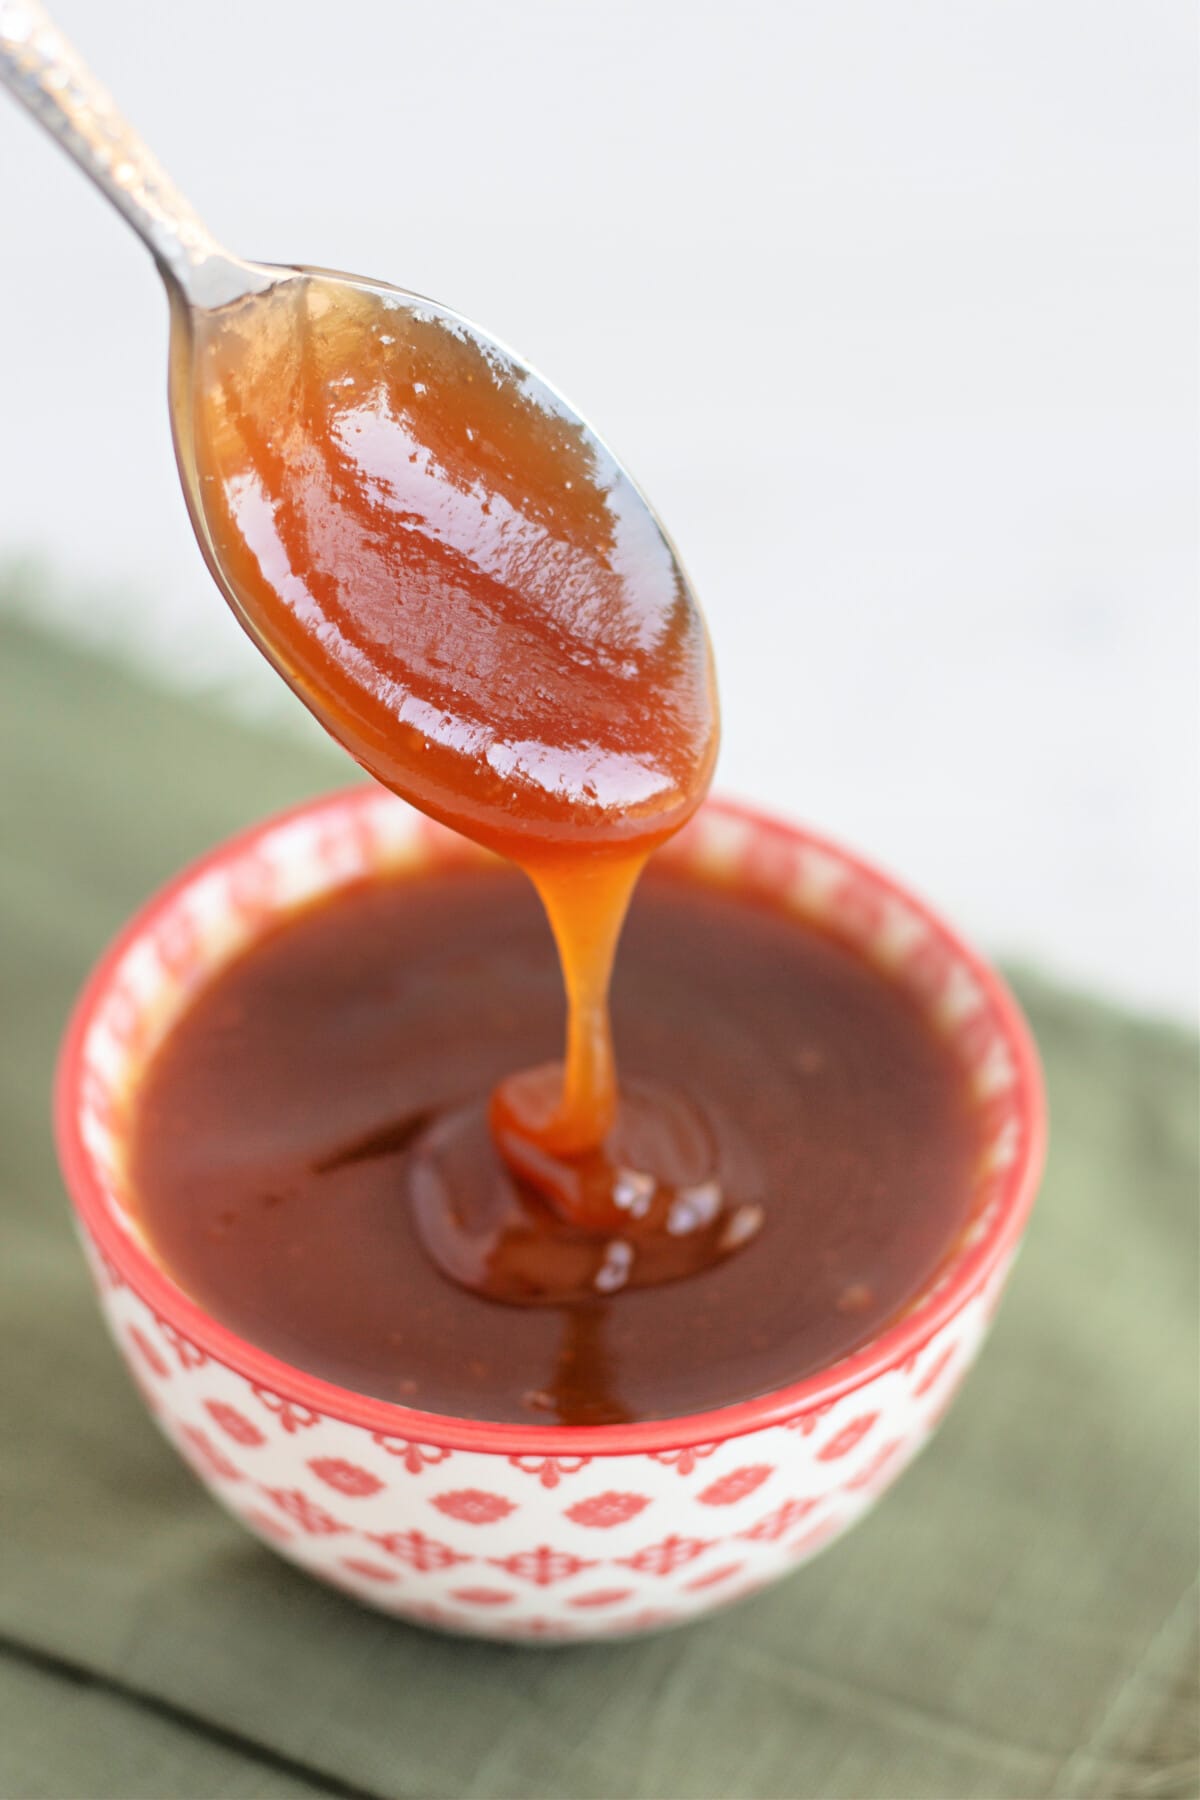 Sweet and Sour Sauce on a Spoon